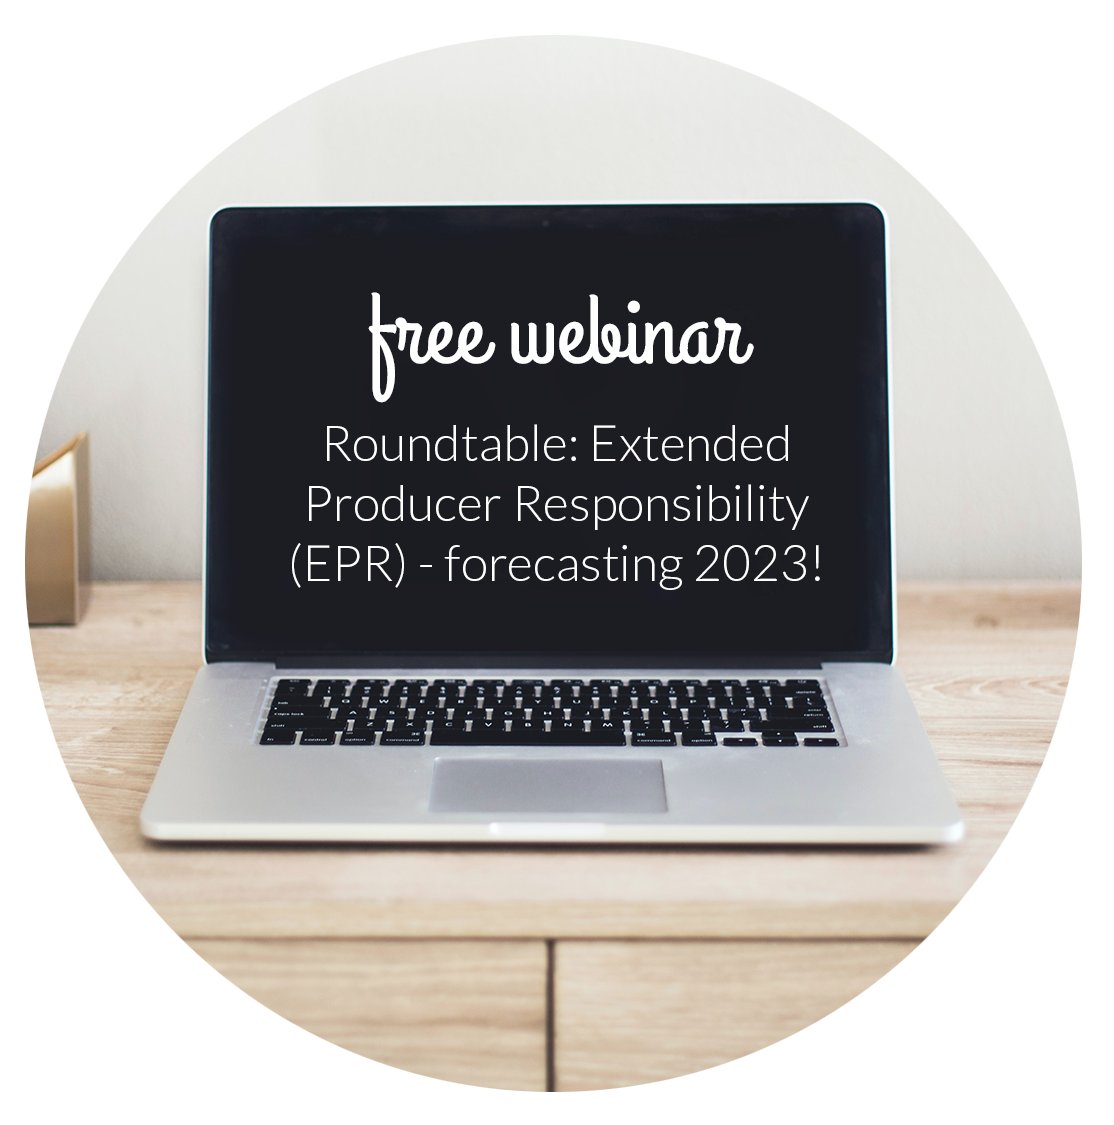 FREE Webinar: Roundtable: Extended Producer Responsibility (EPR) - forecasting 2023! 💻 

Tuesday 31st January at 10am. 

Click here to register your free place 👉 bit.ly/3WxoRfn

#EPR #packagingcompliance #freewebinar #environmentalcompliance